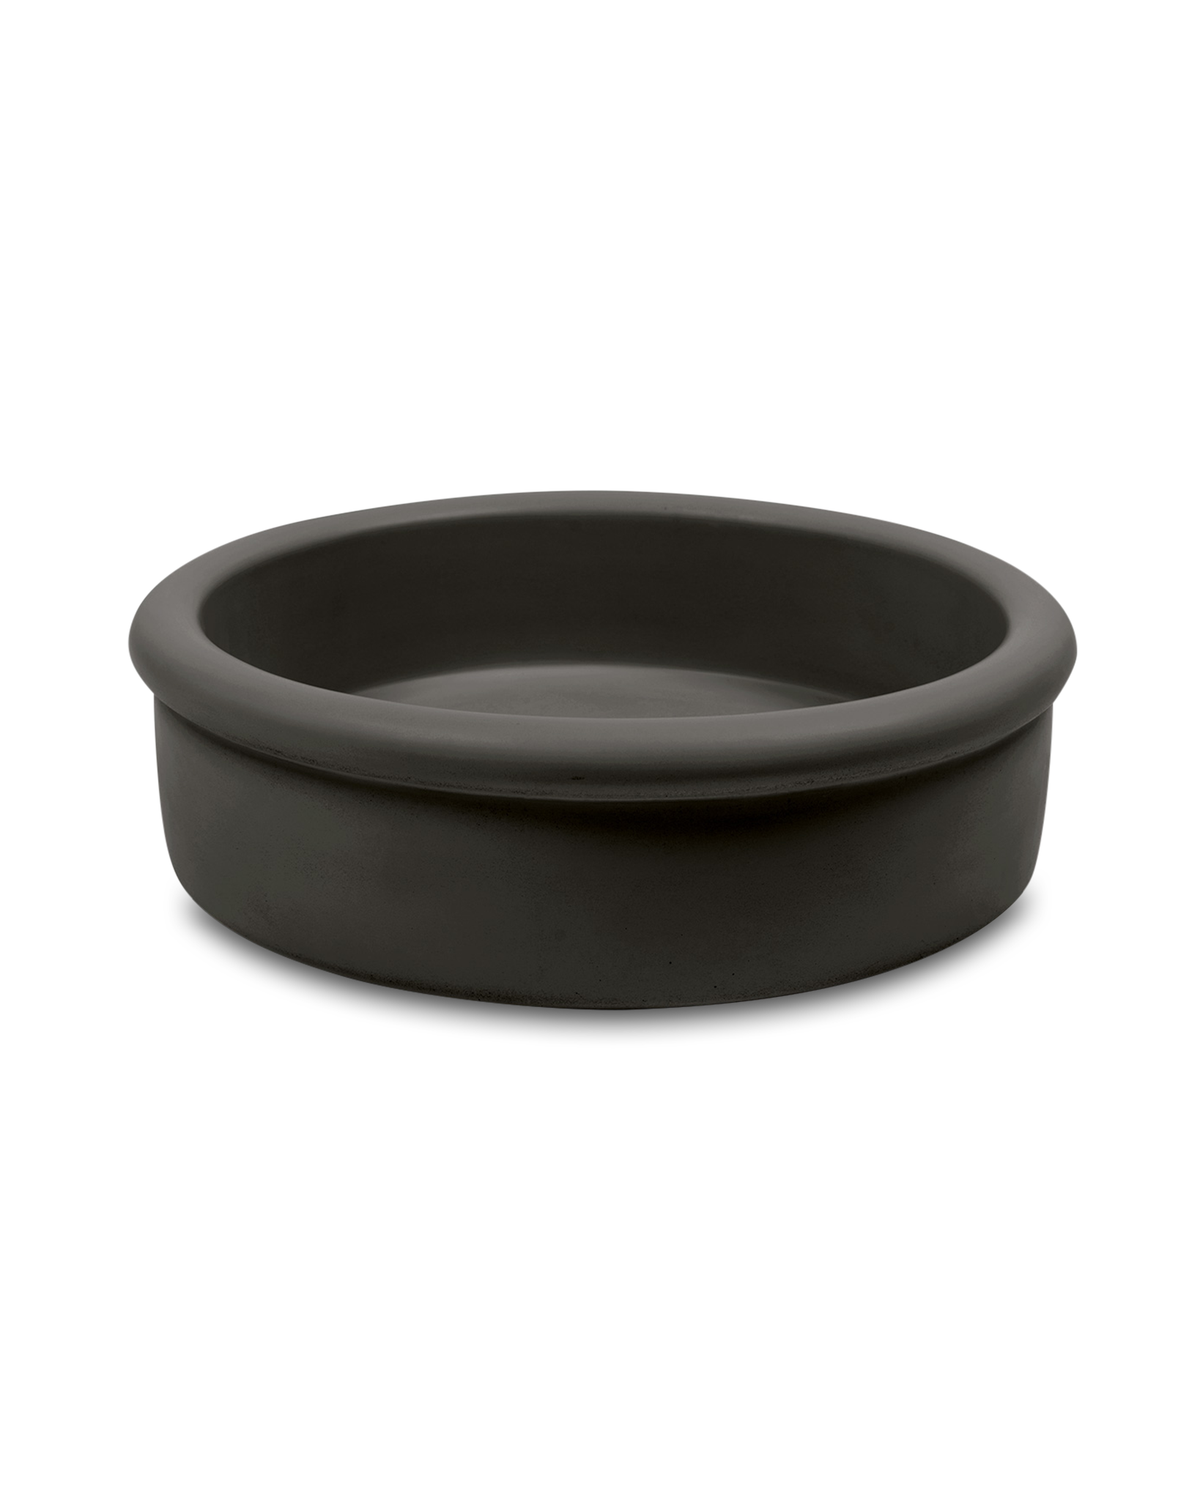 Tubb Basin - Surface Mount (Charcoal)